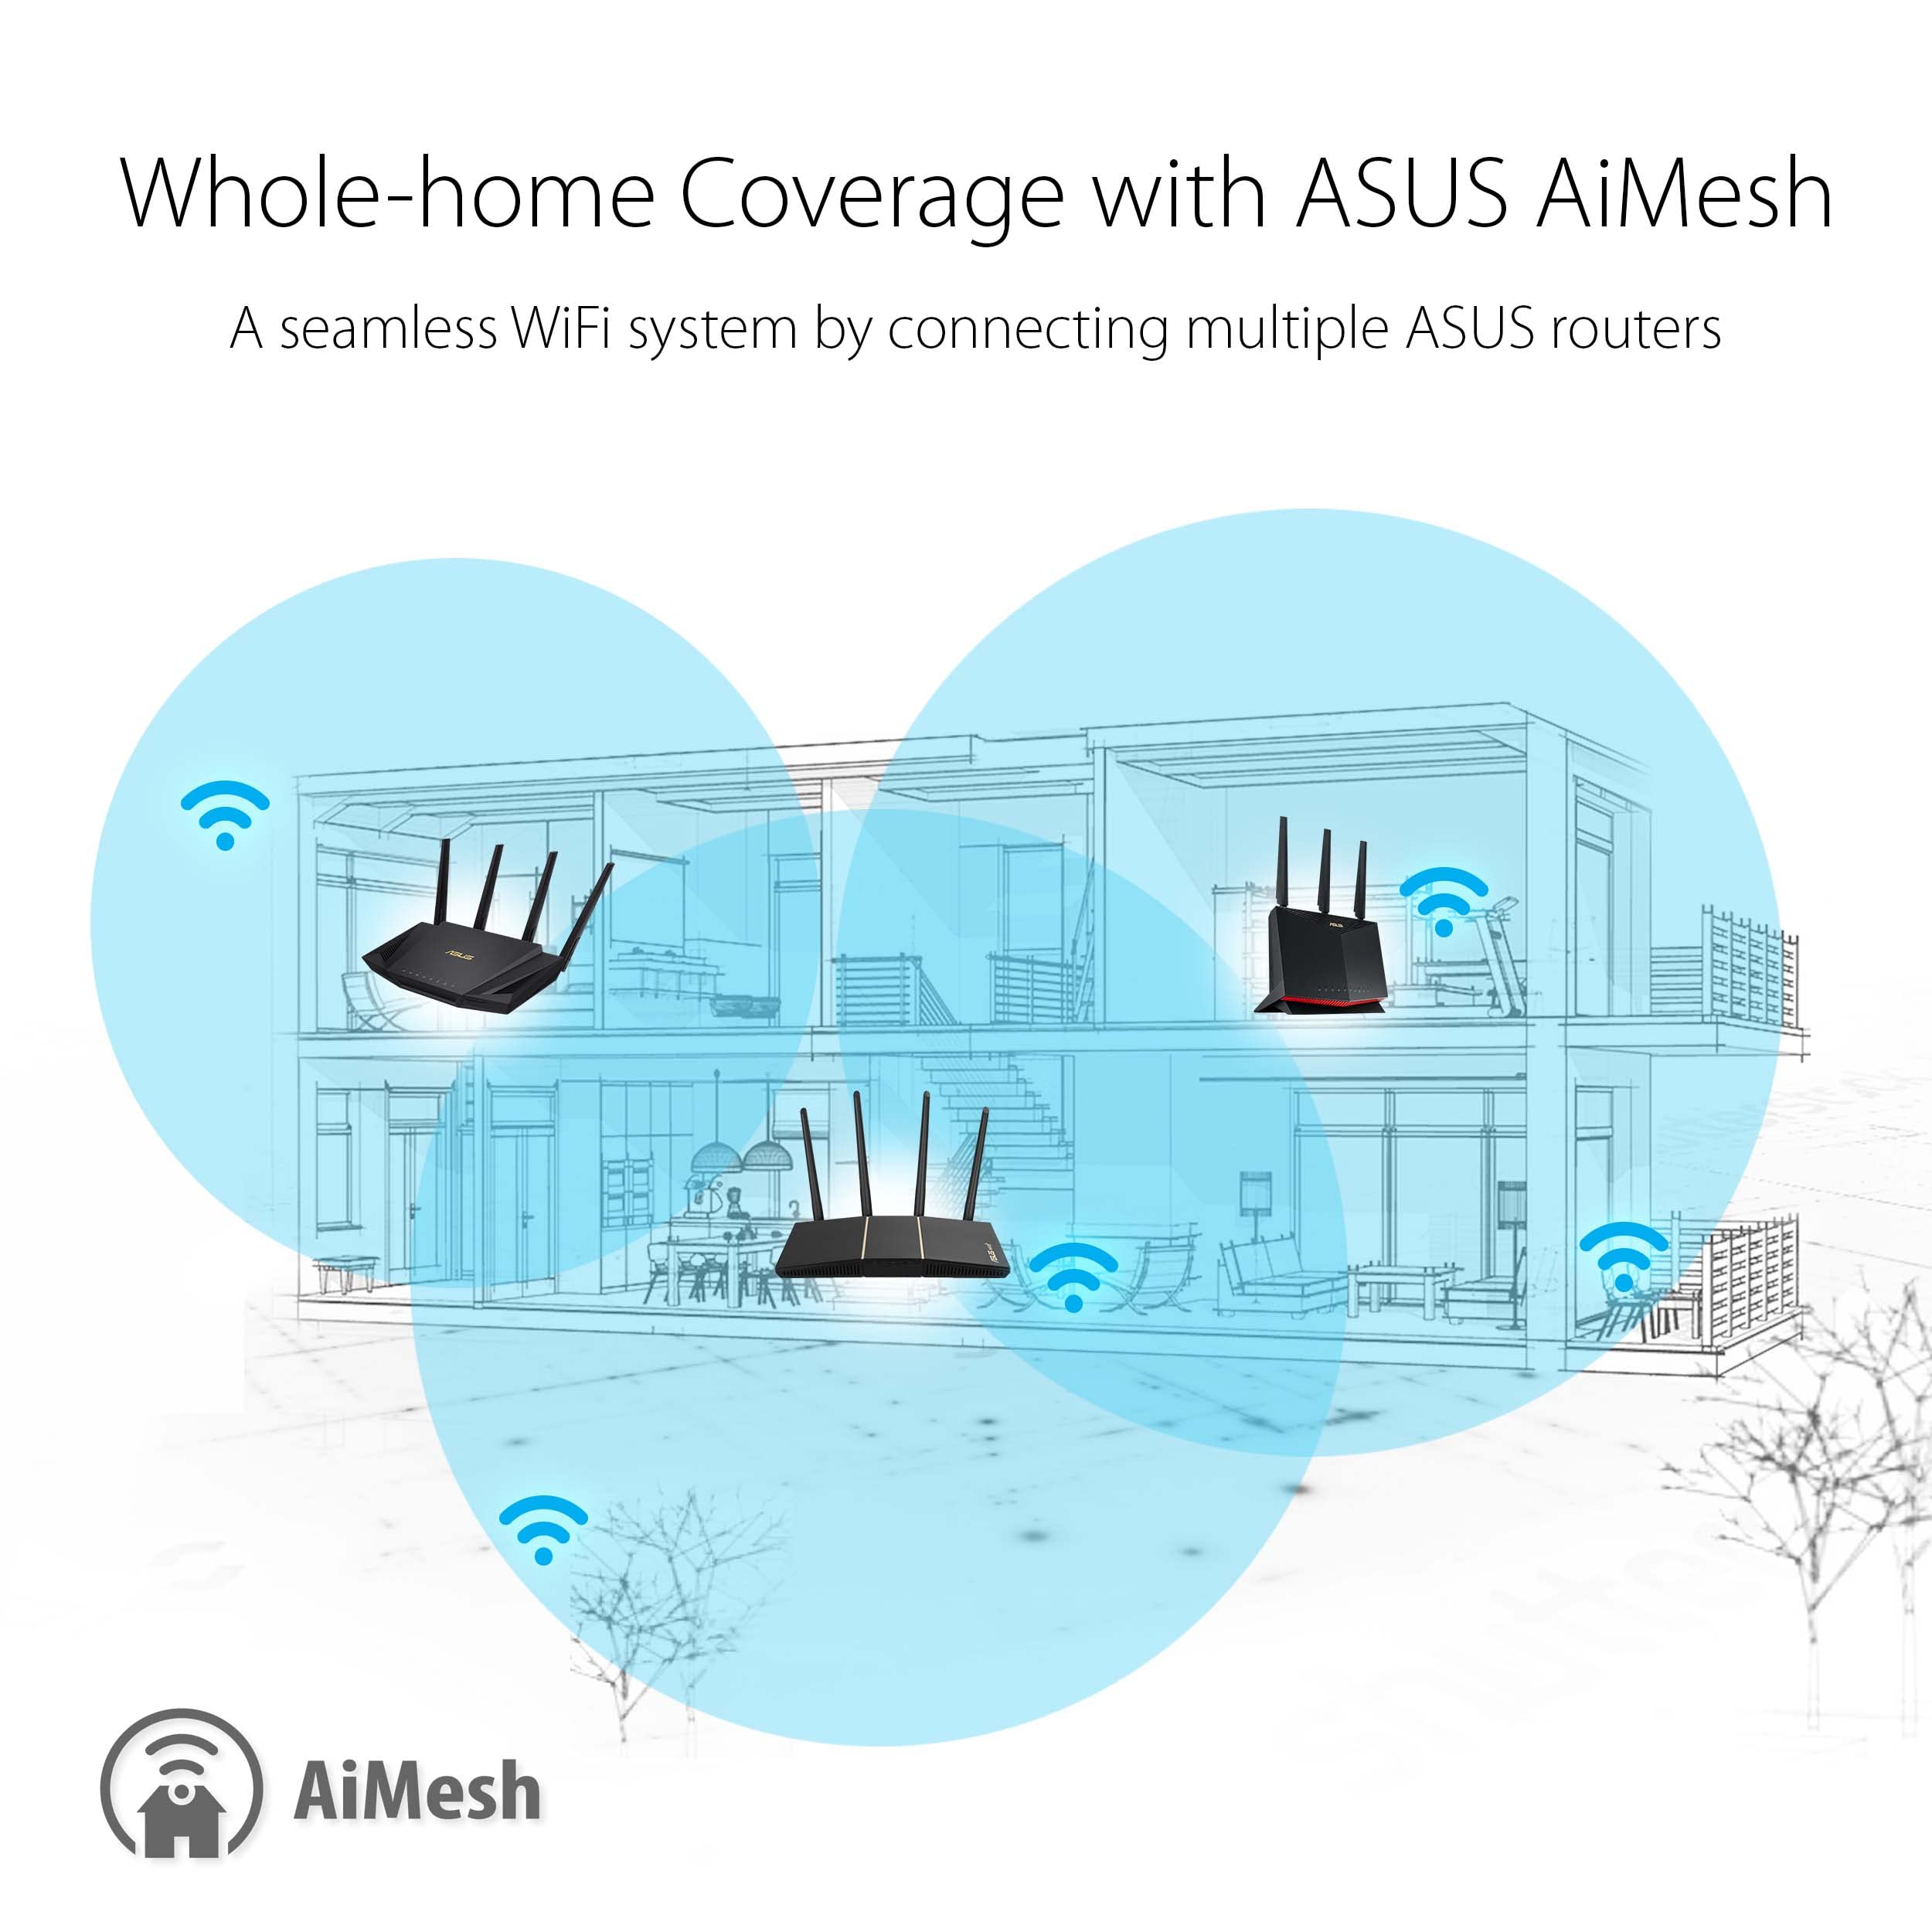 ASUS WiFi 6 Router (RT-AX57) - Dual Band AX3000 WiFi Router, Gaming & Streaming, AiMesh Compatible, Included Lifetime Internet Security, Parental Control, MU-MIMO, OFDMA